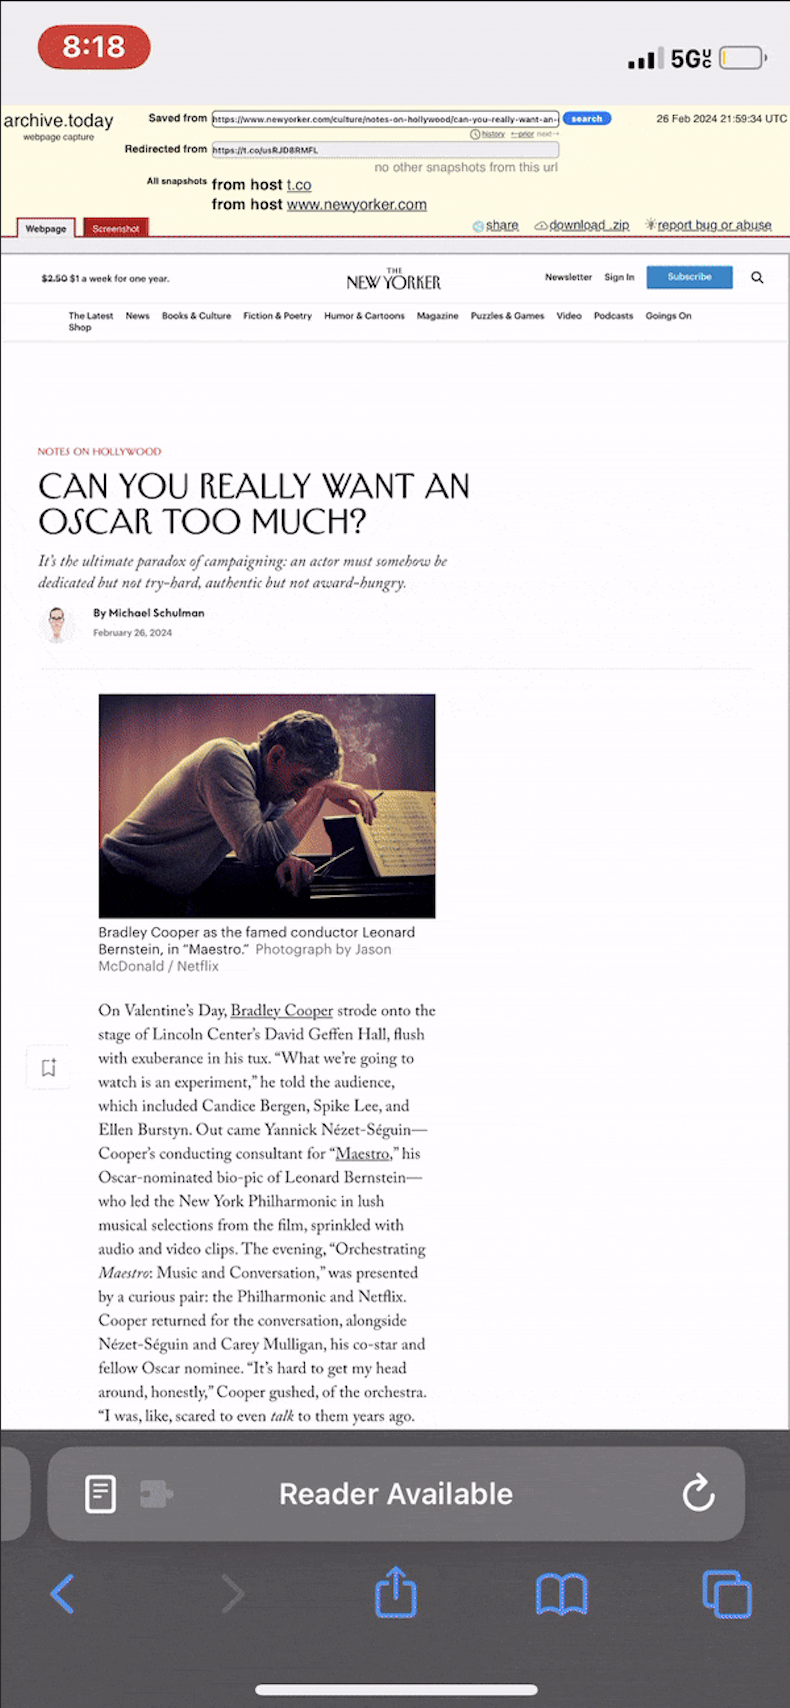 new yorker paywall bypassed